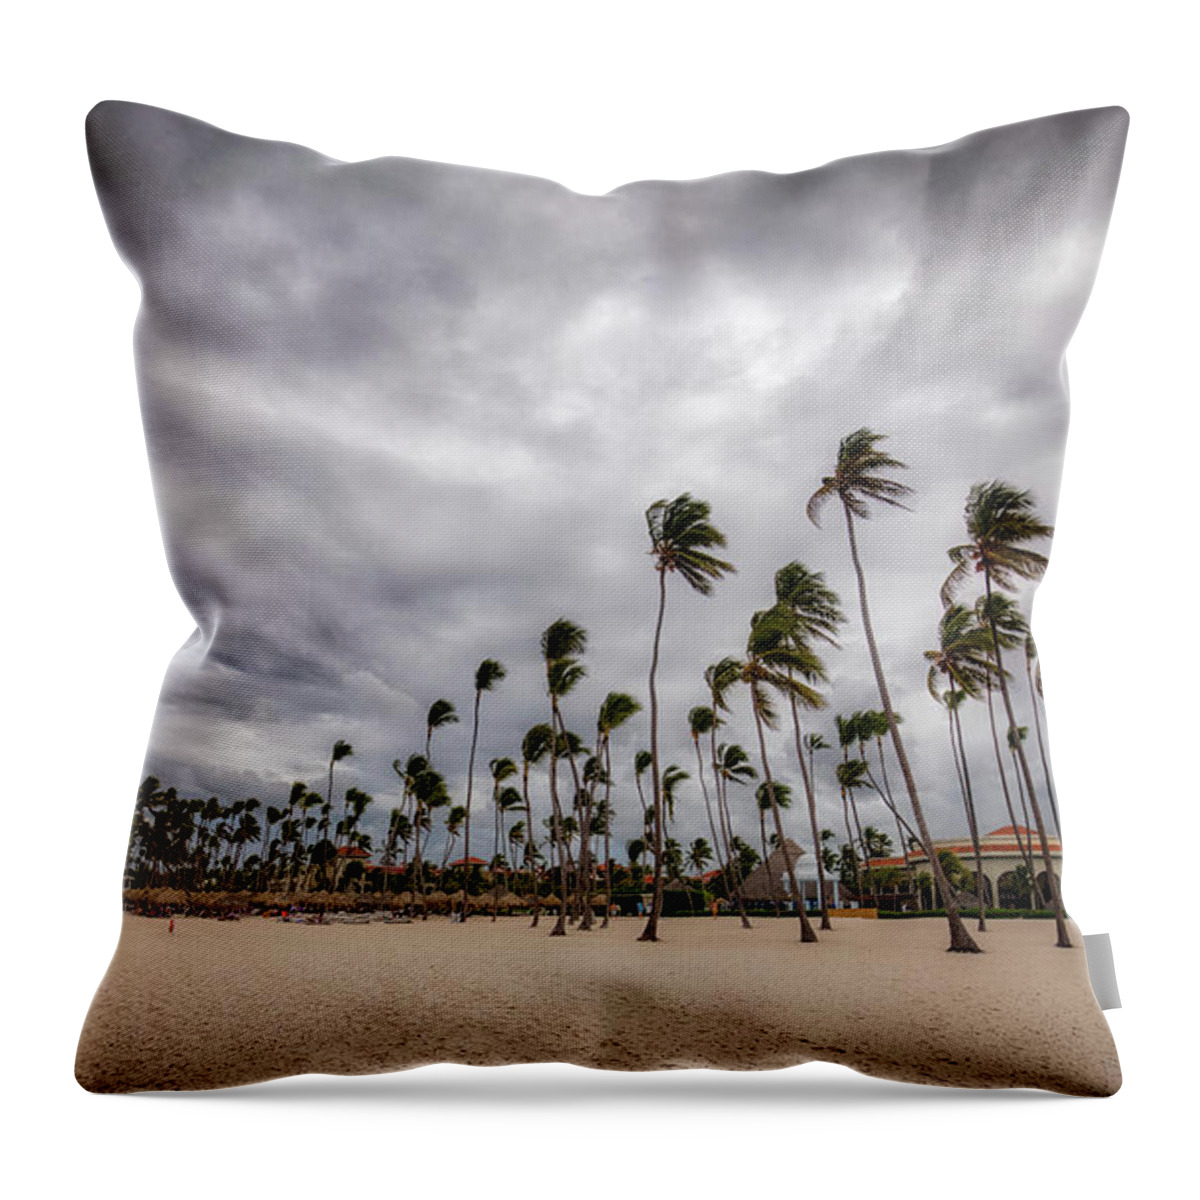 Punta Throw Pillow featuring the photograph Windy Beach by Ross Henton